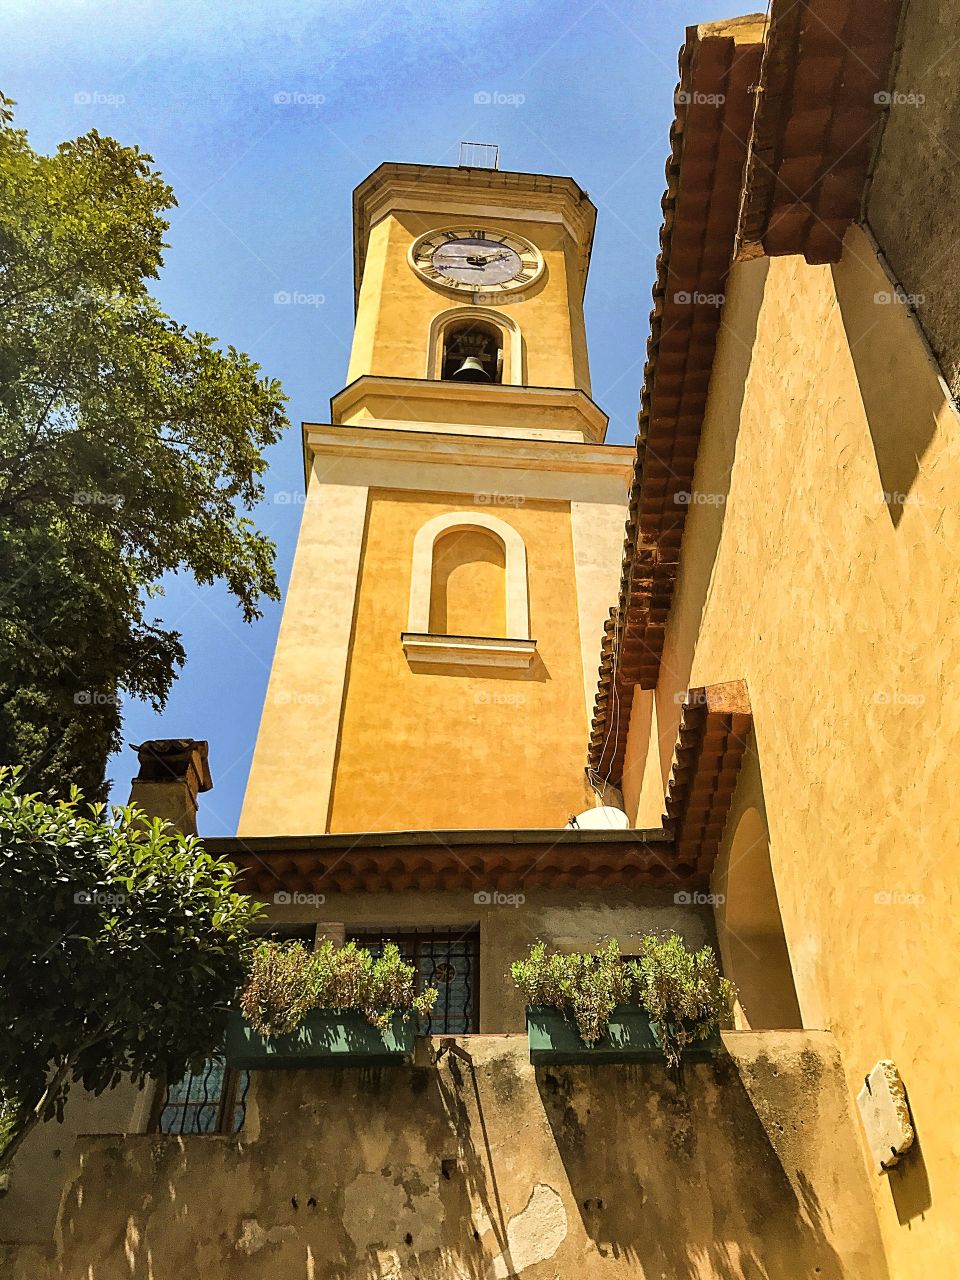 Clock tower in Eze, France